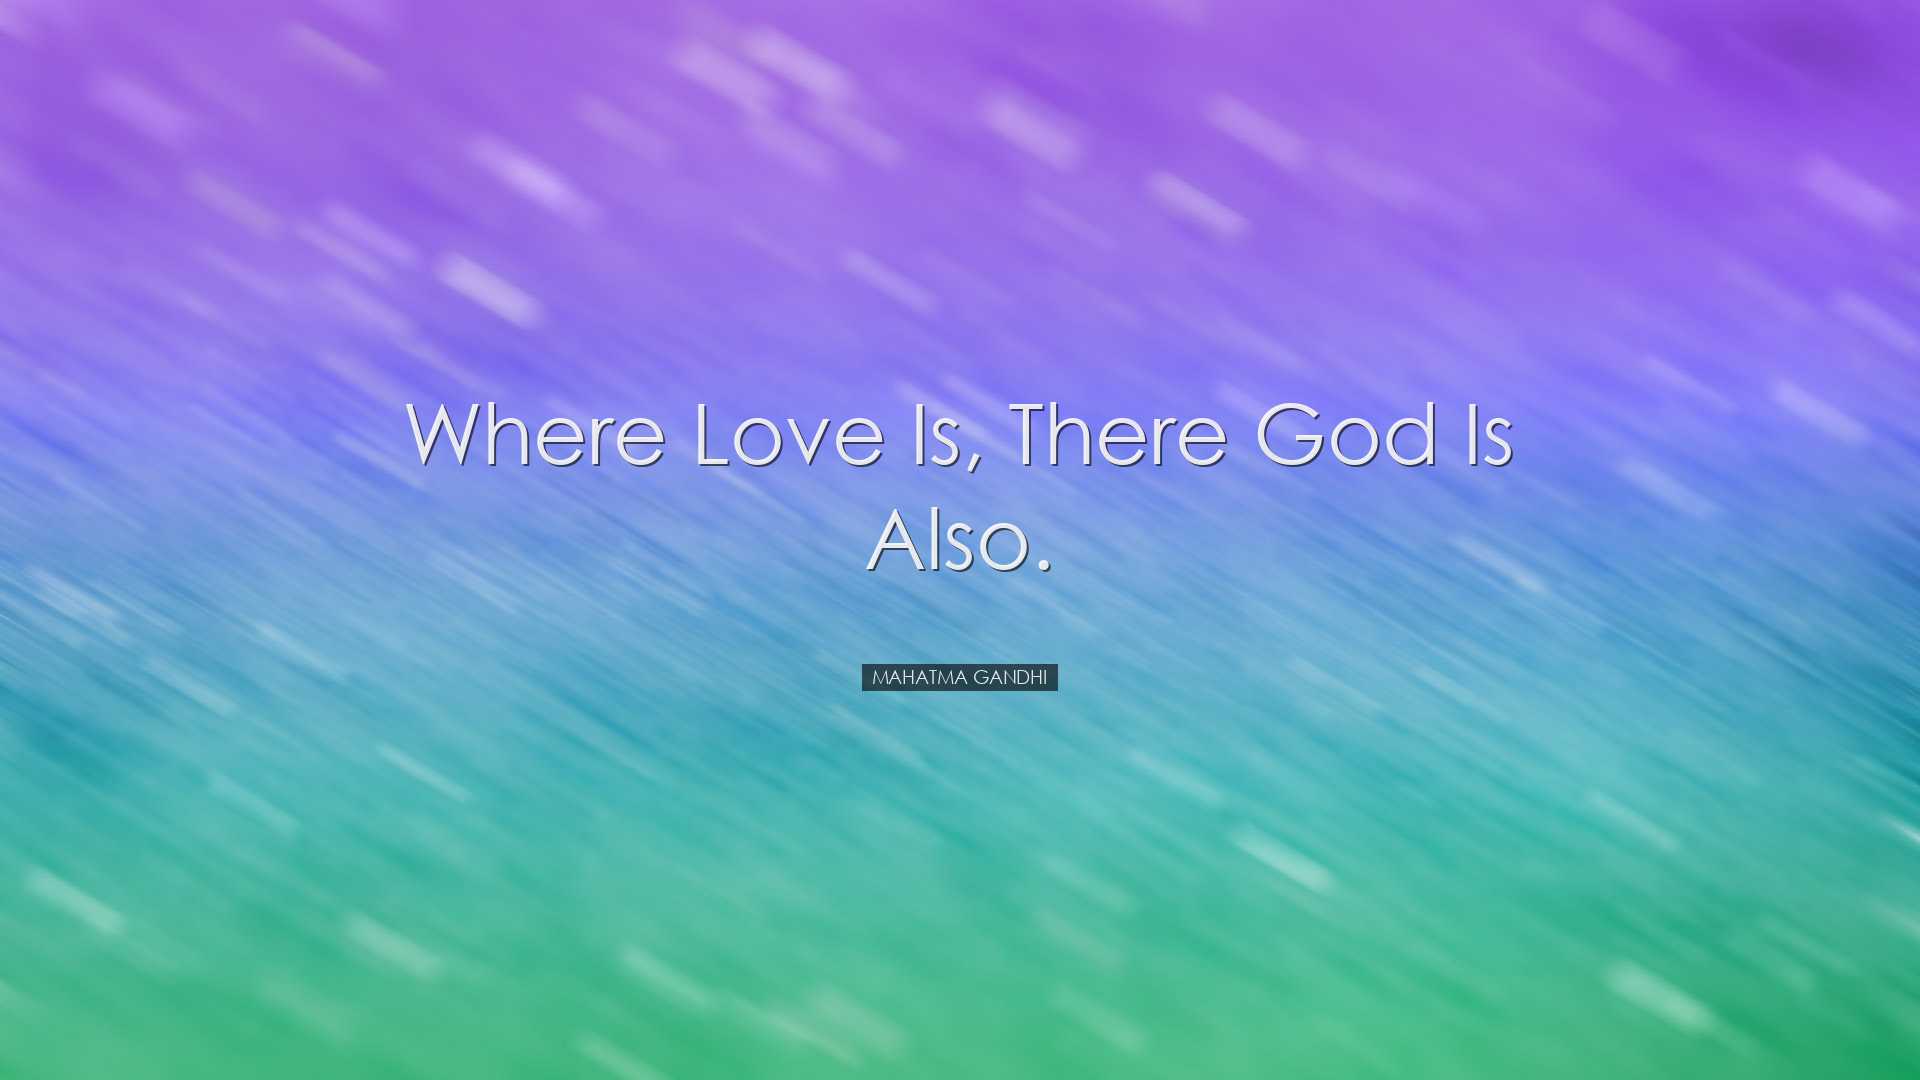 Where love is, there God is also. - Mahatma Gandhi